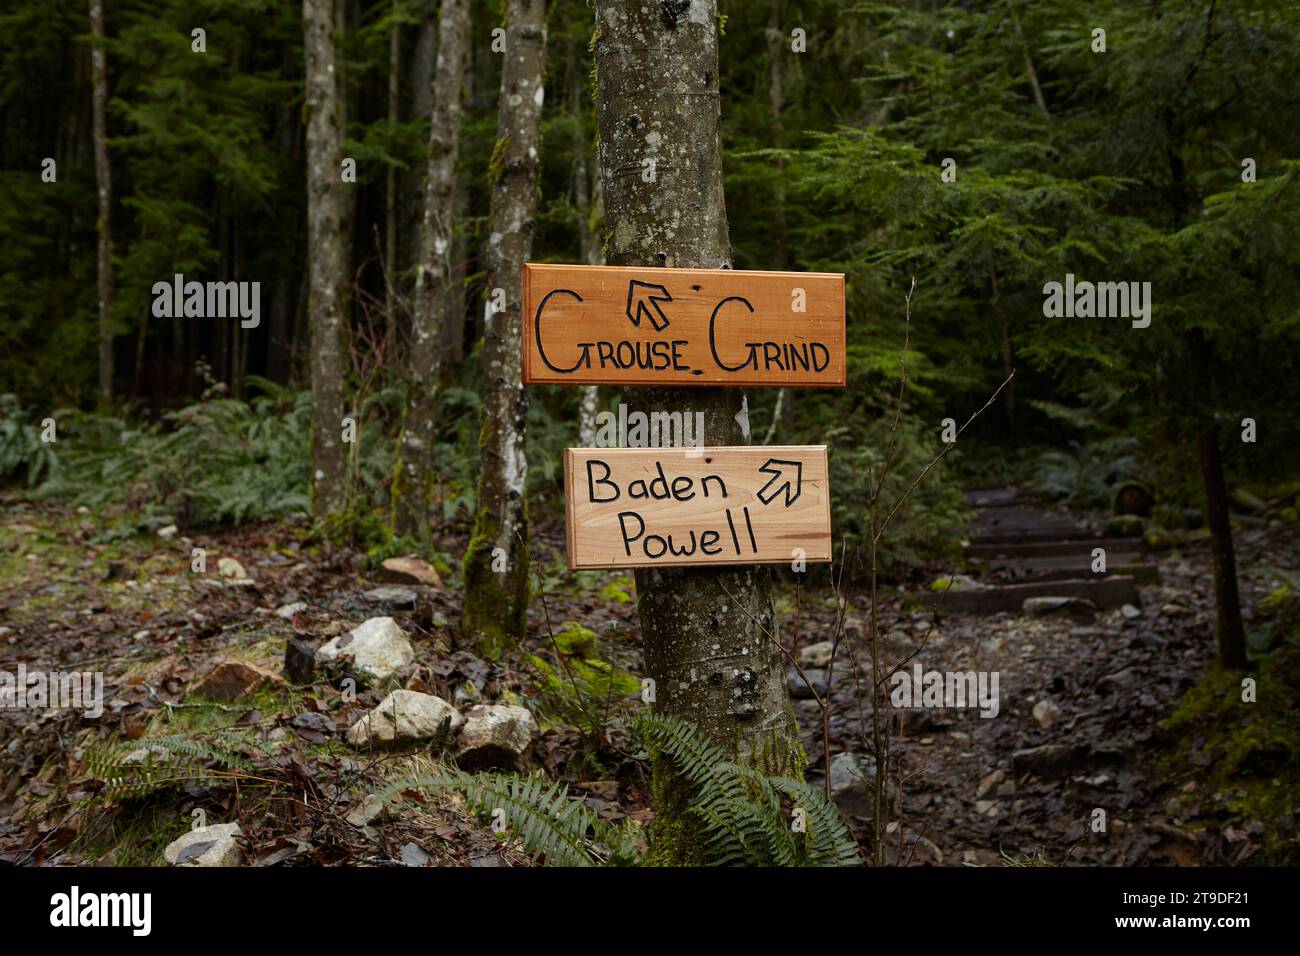 Grouse Grind and Baden Powell trail signs at trailhead on Grouse Mountain, popular hiking, running and fitness routes in North Vancouver. Stock Photo